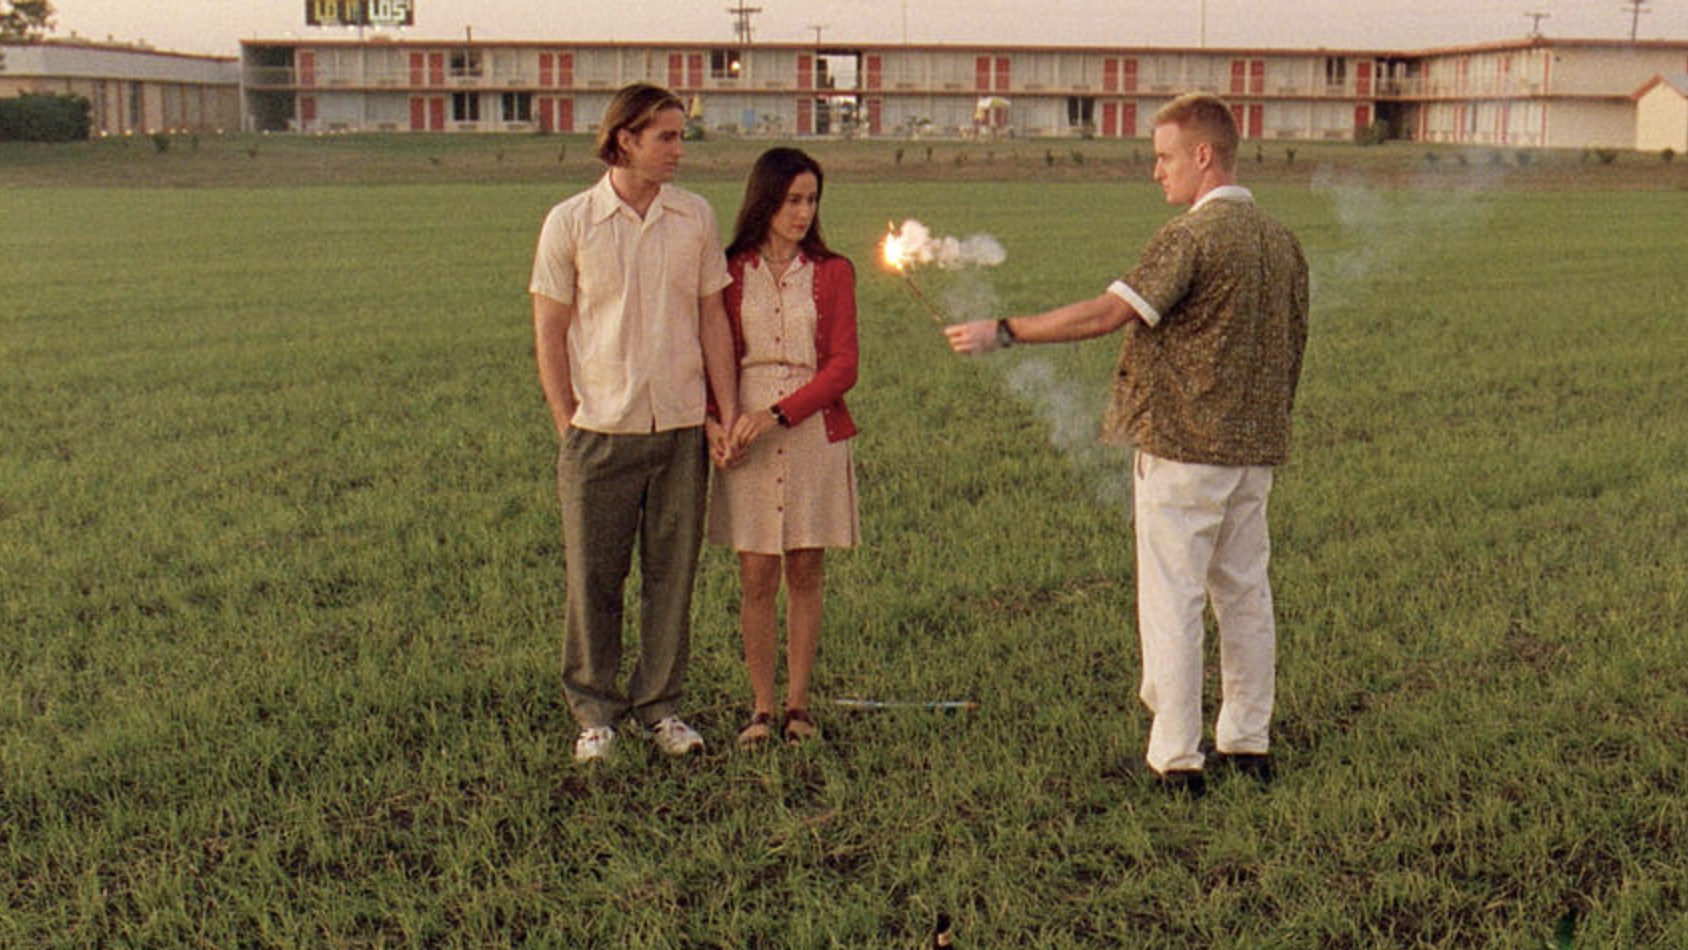 A still from the movie Bottle Rocket in which main characters Dignan, Anthony and Inez stand on a lawn next to a motel.